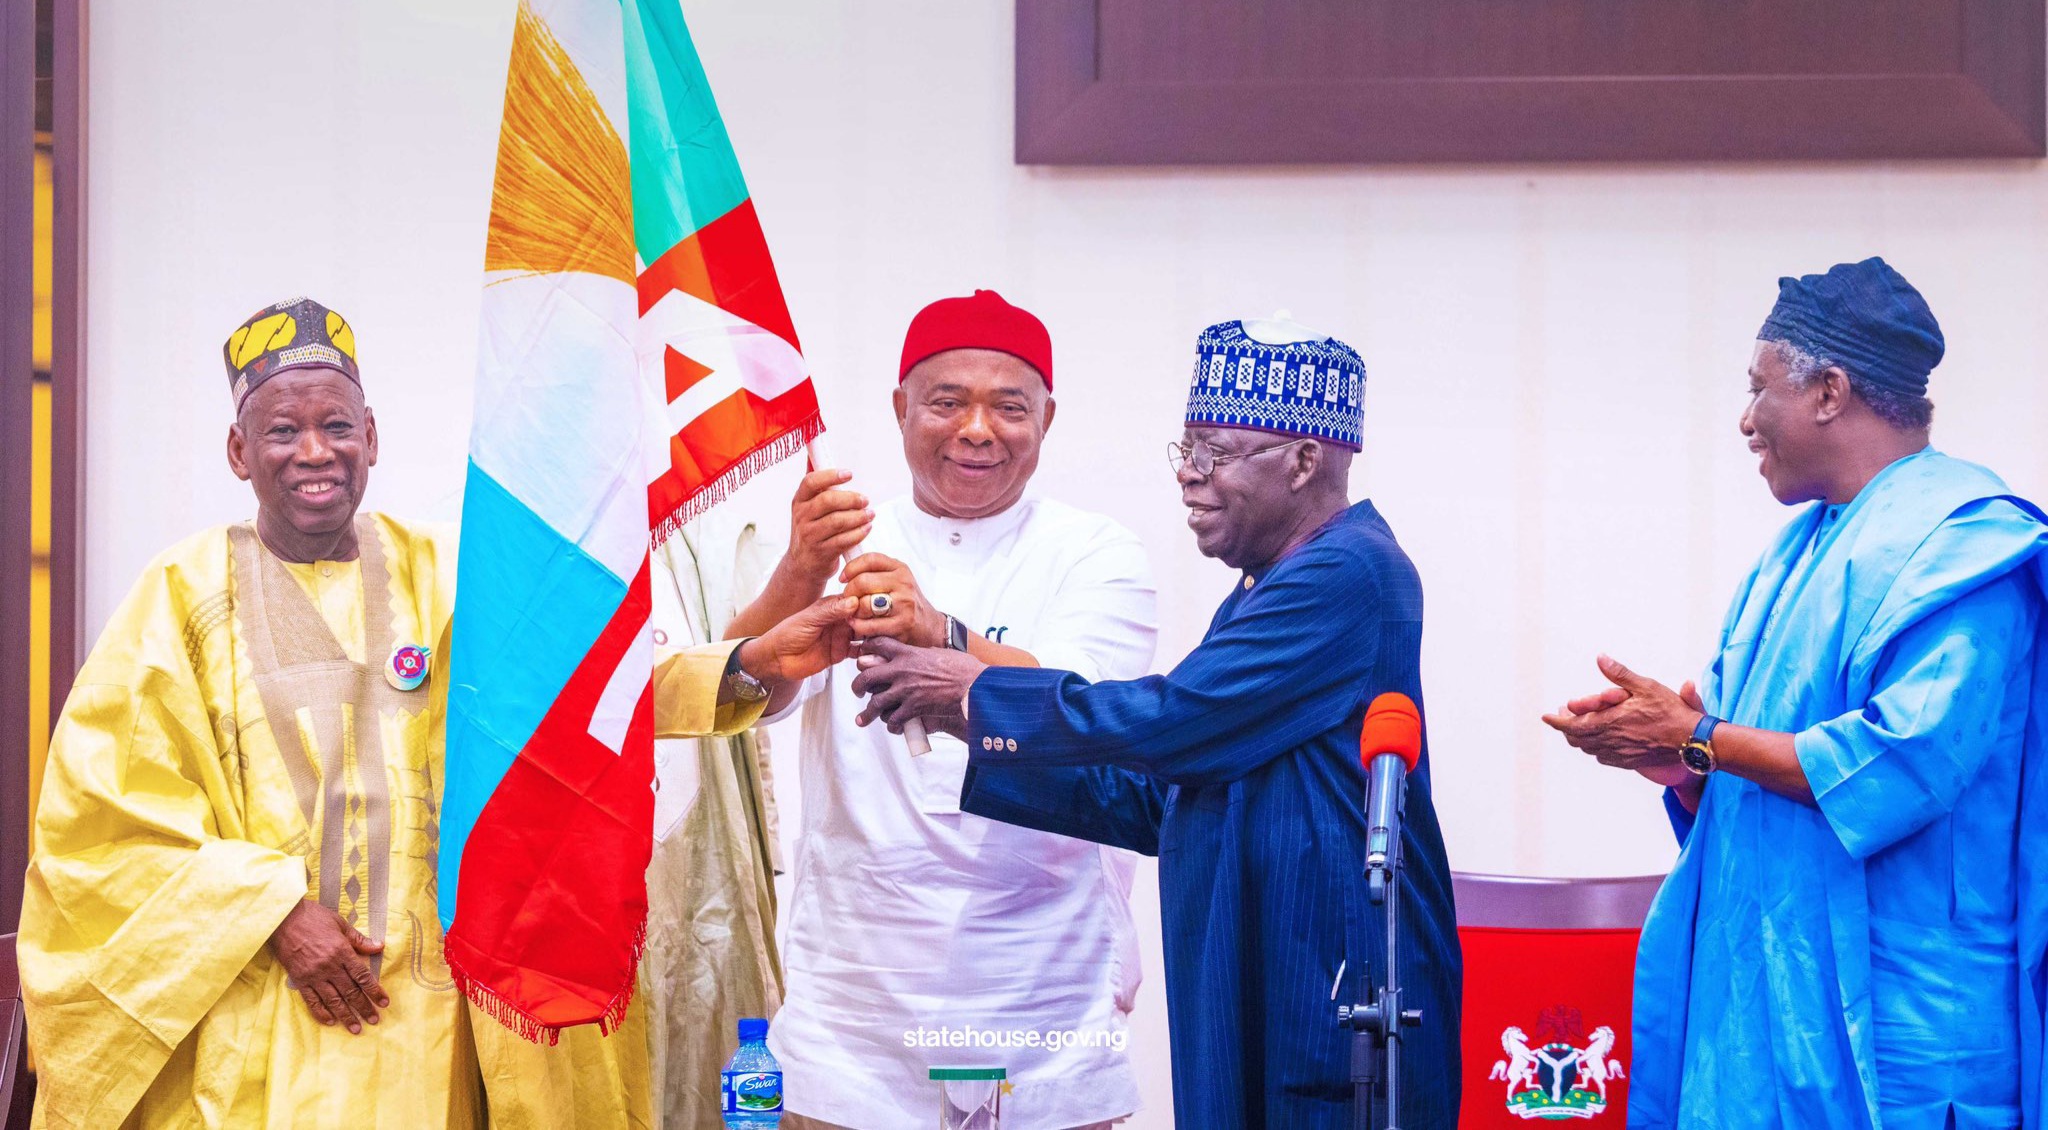 President Bola Tinubu hands the APC flag to the party's governorship candidate in Imo State, Governor Hope Uzodinma